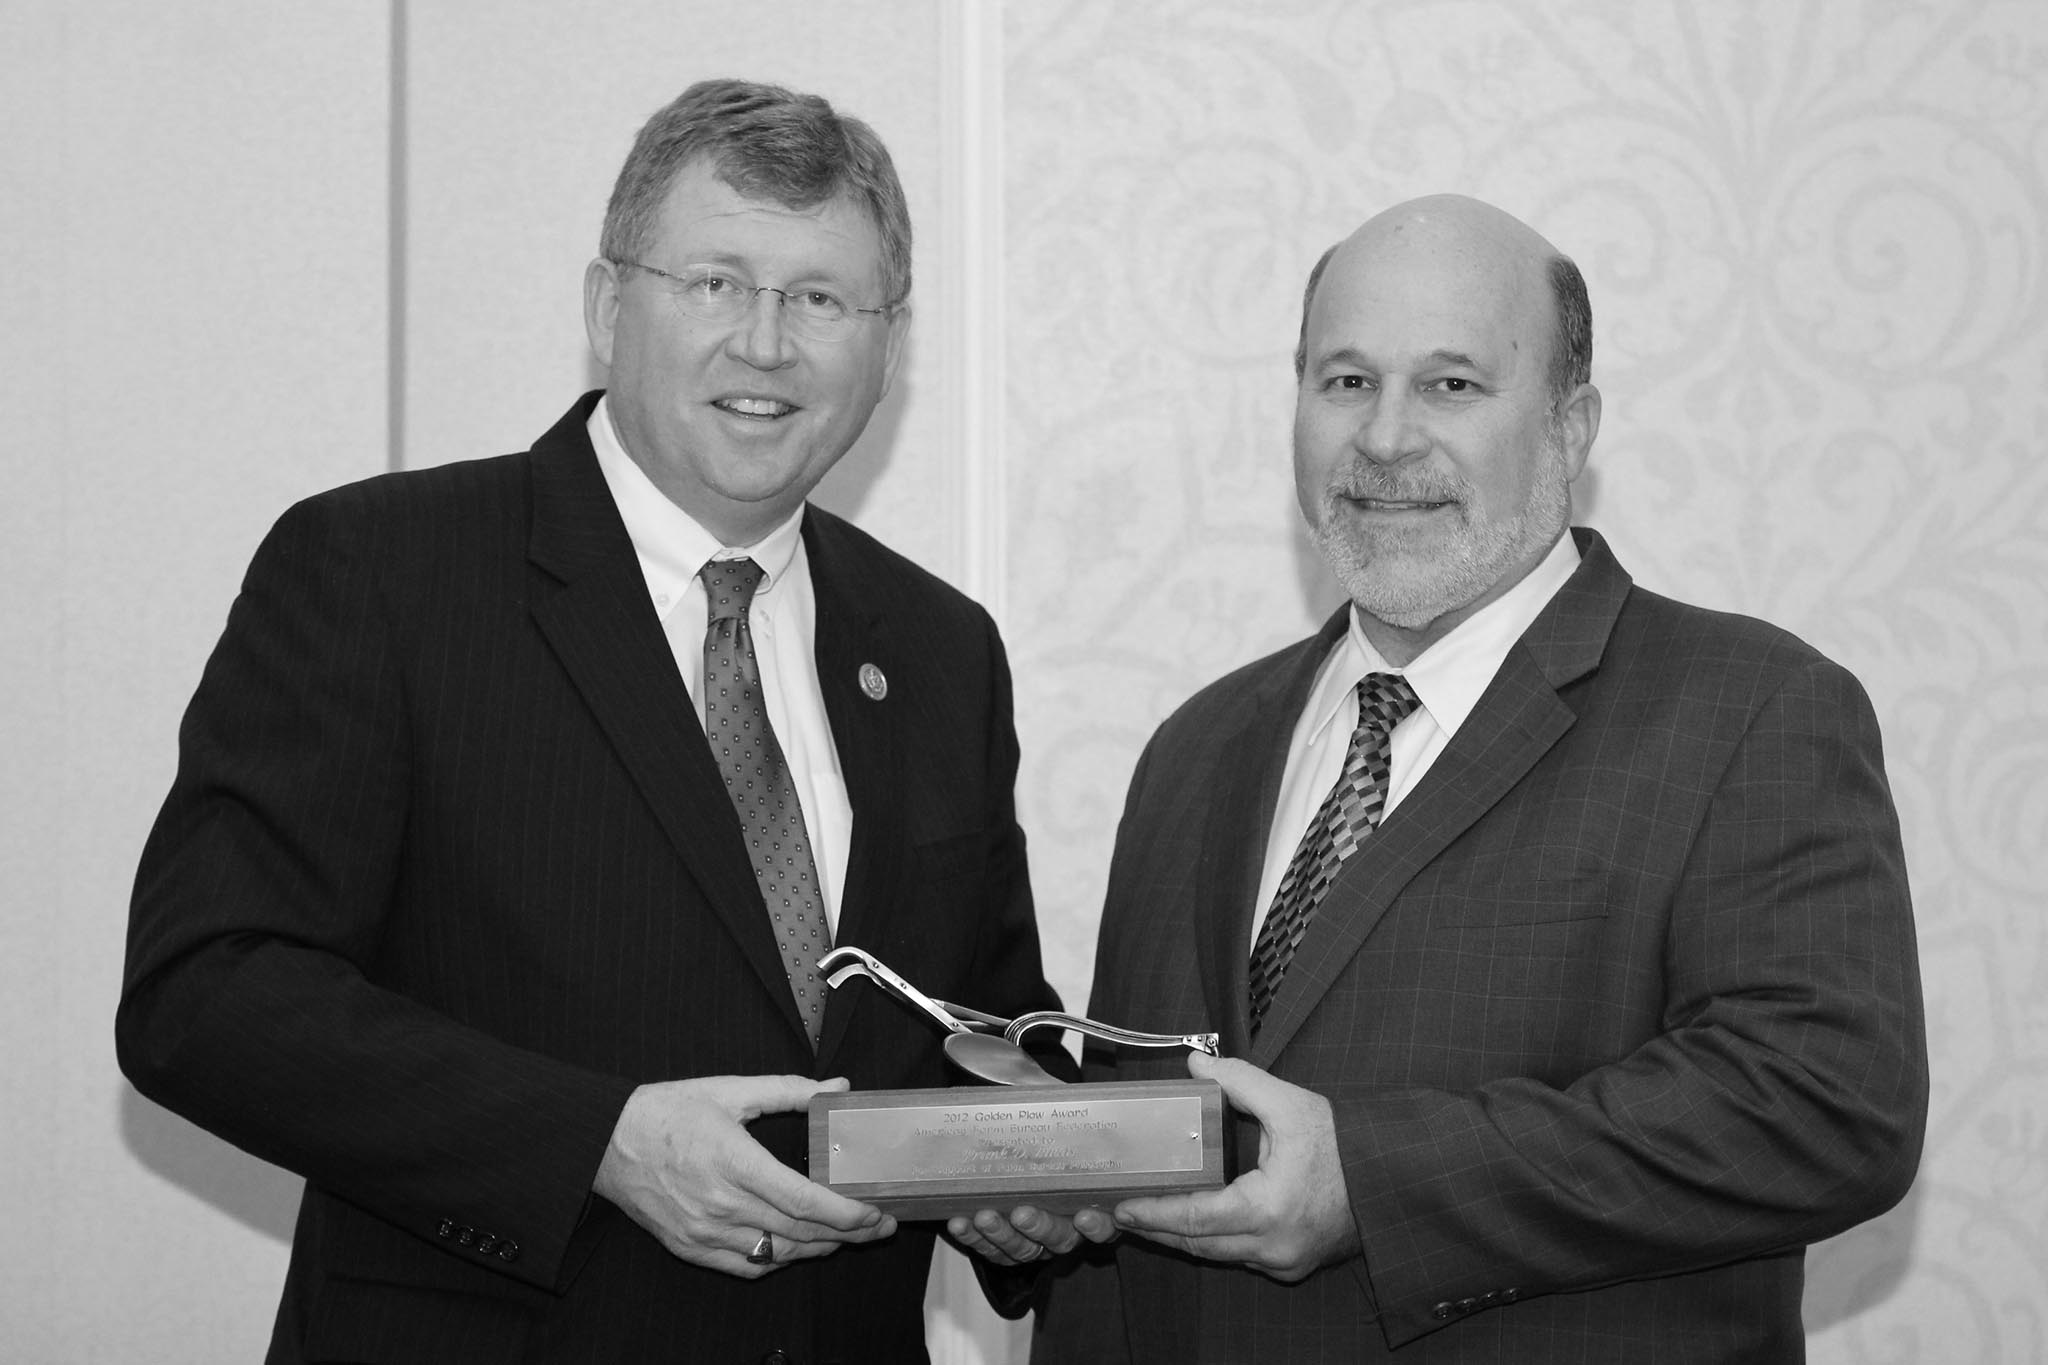 A longtime Oklahoma Farm Bureau member, U.S. Rep. Frank Lucas of Roger Mills County (left) received the 2012 American Farm Bureau Federation’s Golden Plow award from AFBF President Bob Stallman at the 2013 OKFB Legislative Leadership Conference. Lucas was recognized for his work on researching and developing the next farm bill. The Golden Plow is the highest honor AFBF bestows upon congressional leaders, recognizing members of Congress who exemplify agricultural leadership and support of Farm Bureau policies. Recipients are chosen for having a philosophy or record that demonstrates a commitment to sound agricultural policies supported by Farm Bureau, the private enterprise system, fiscal conservatism and reduced federal regulation of businesses and individuals.